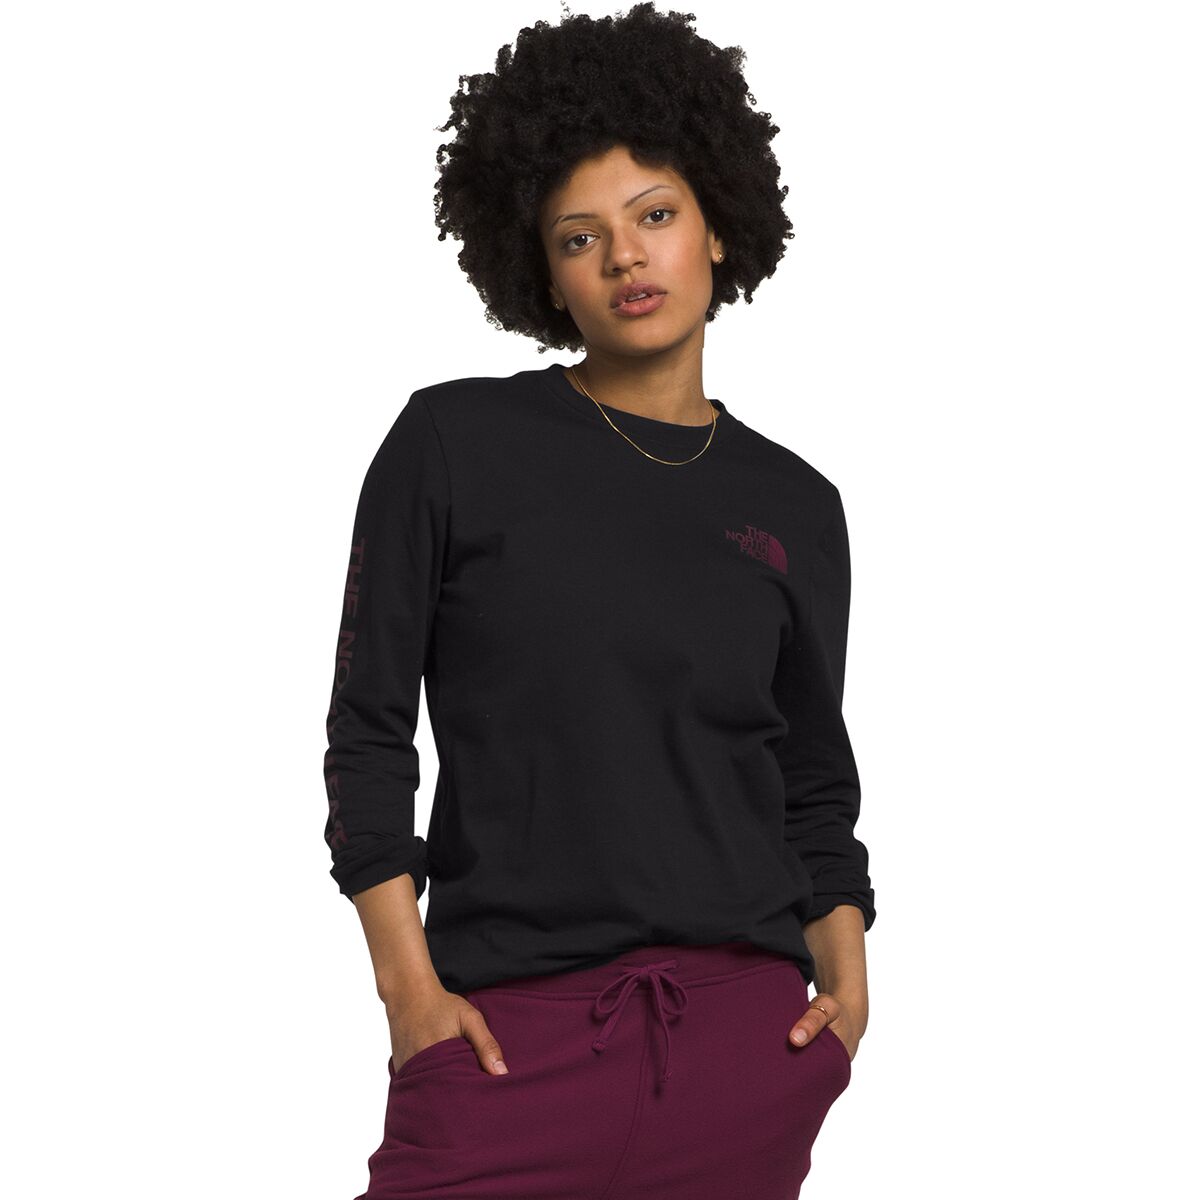 The North Face Hit Graphic Long-Sleeve T-Shirt - Women's